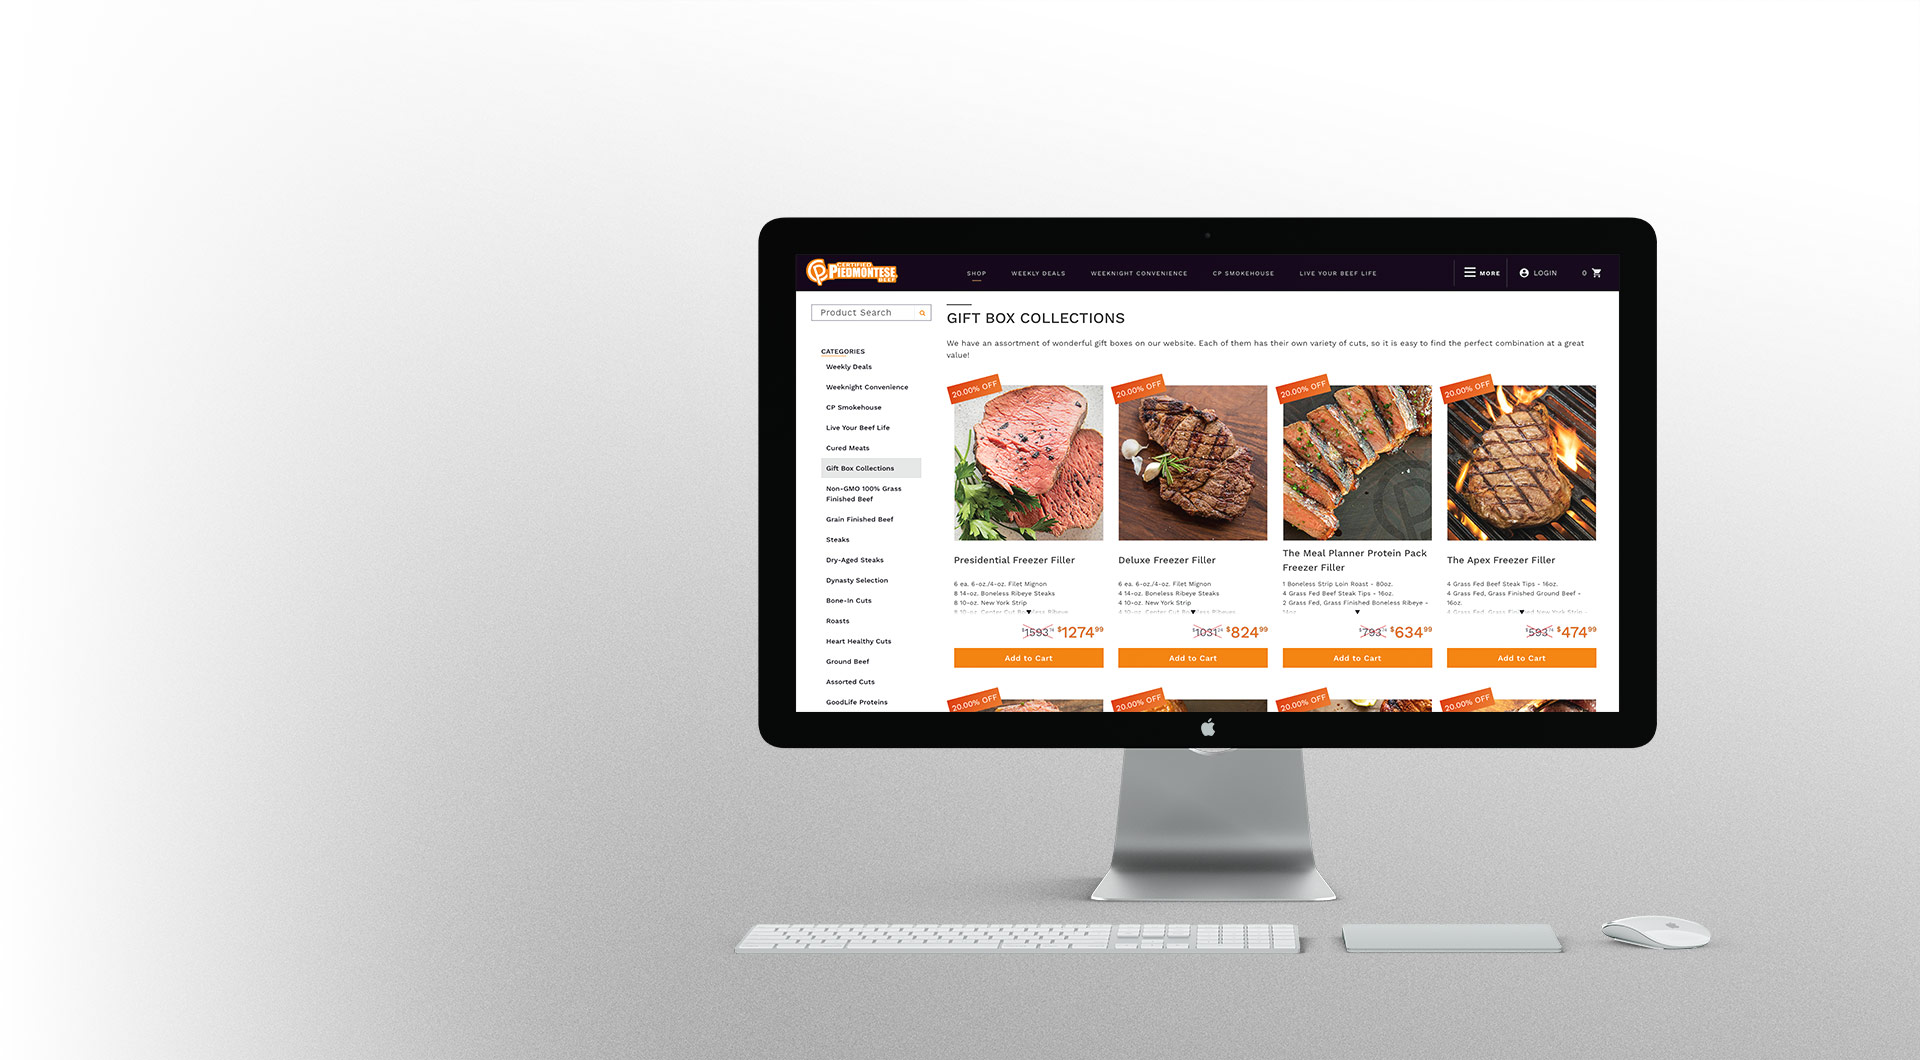 Shopping for meat online with a desktop computer